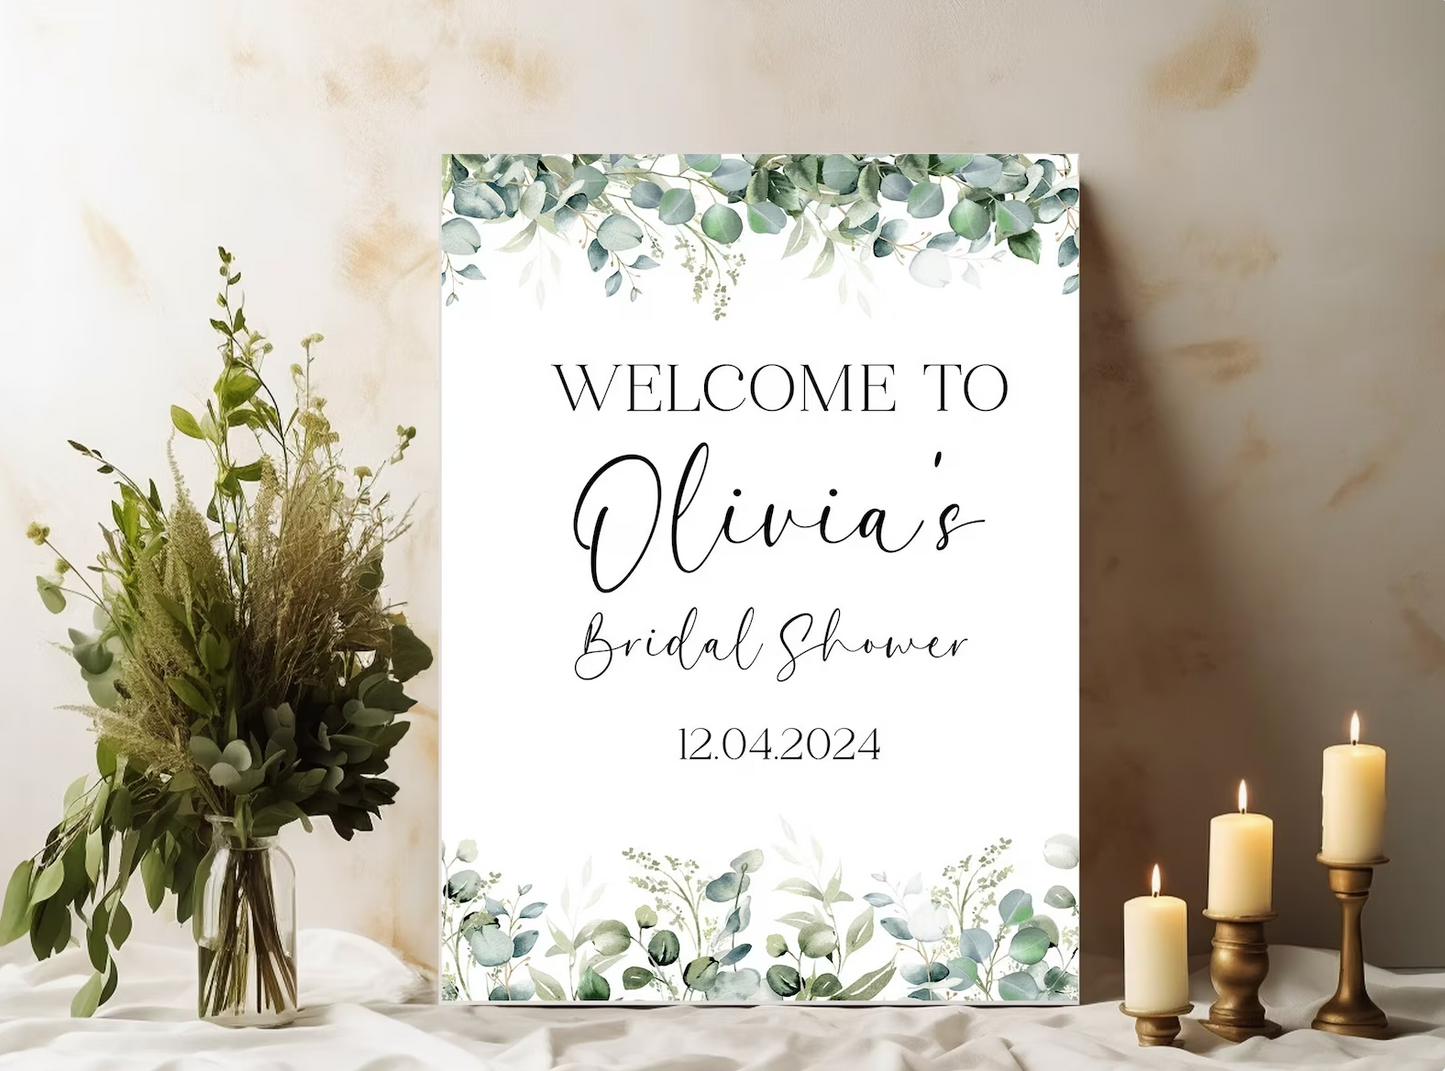 Personalised Welcome Bridal Shower Sign | A1 A2 Foam Board Sign for any Event